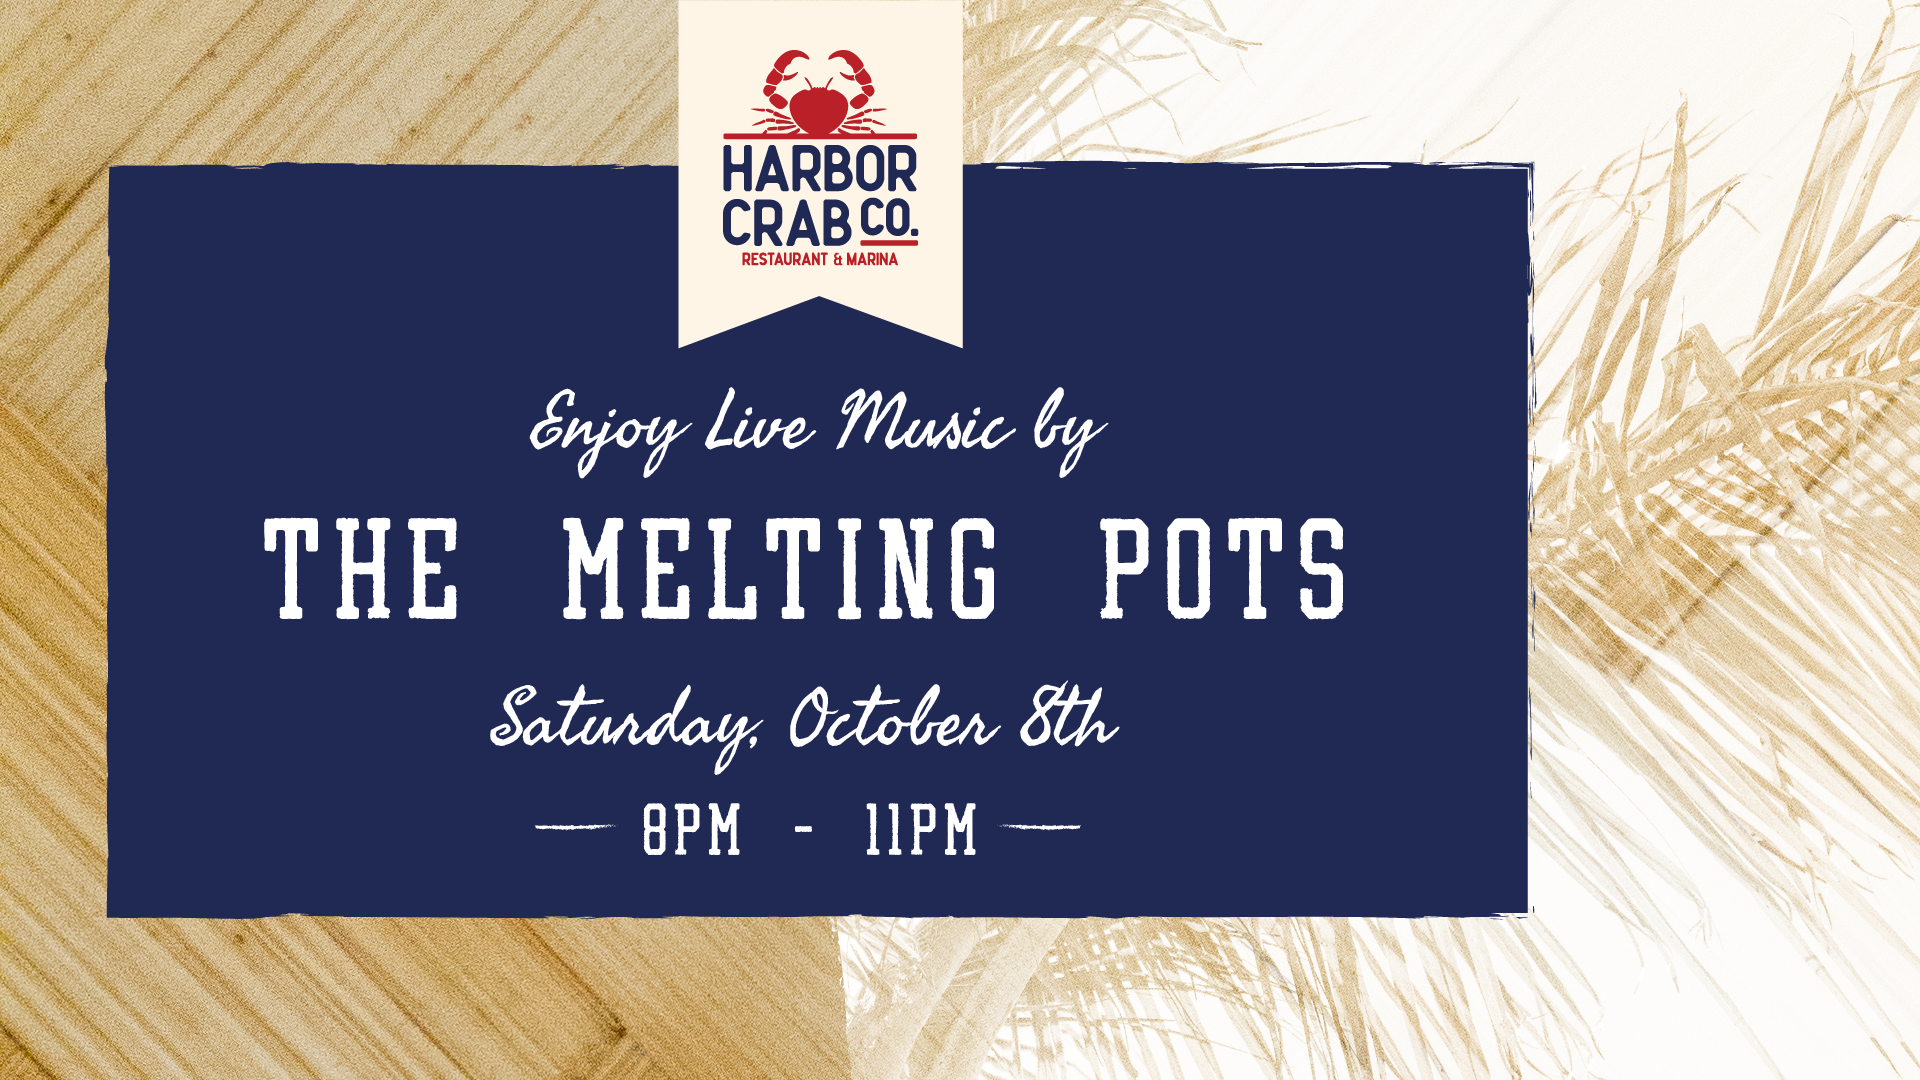 Flyer for the Melting Pots on Saturday, Oct 8th